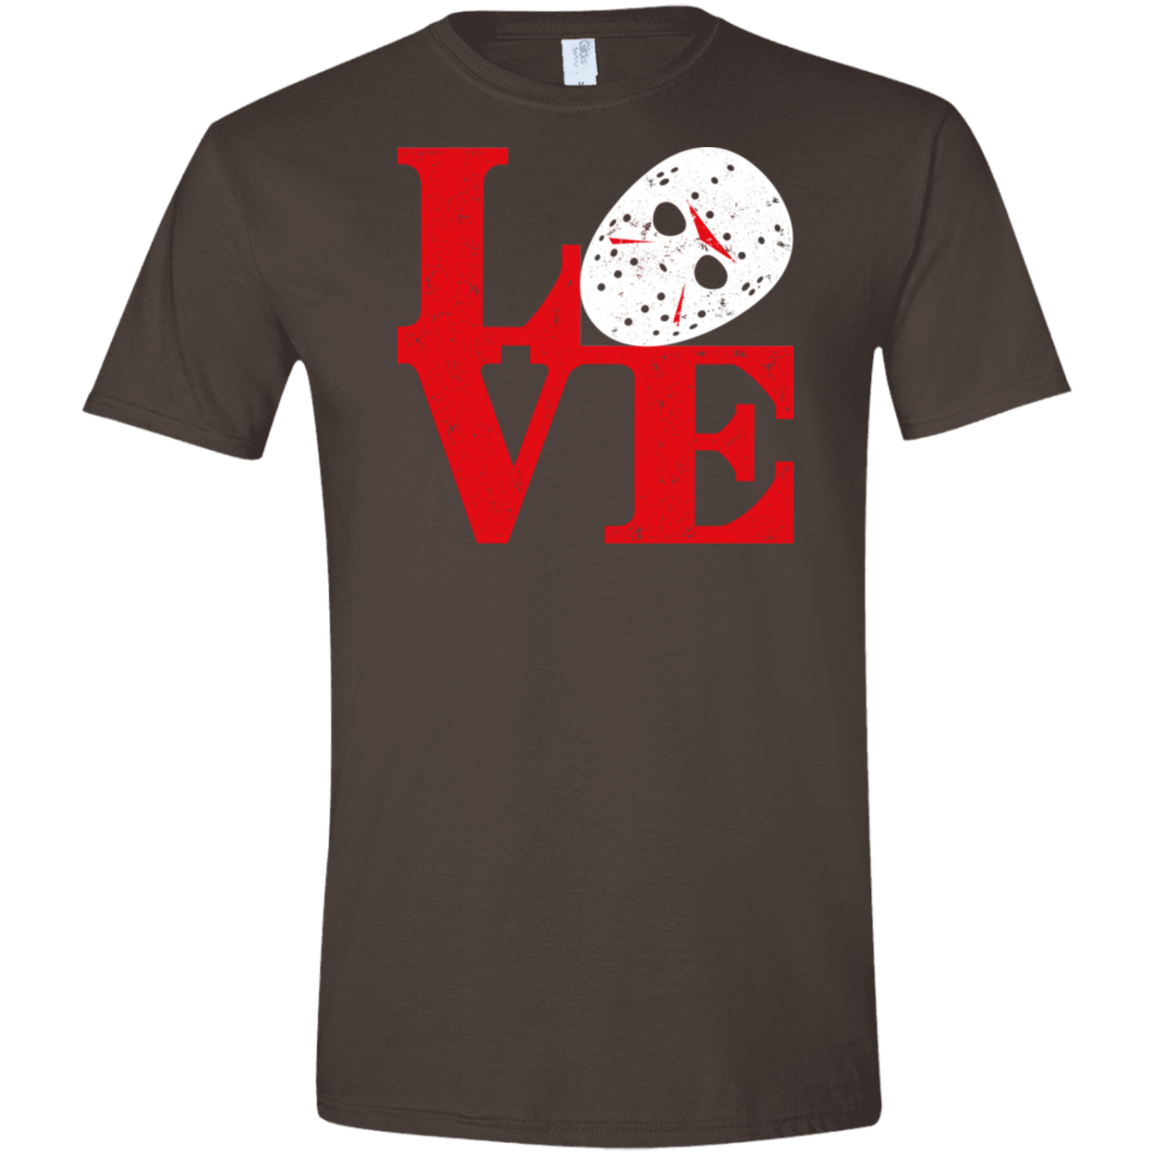 T-Shirts Dark Chocolate / S F13 Love Men's Semi-Fitted Softstyle